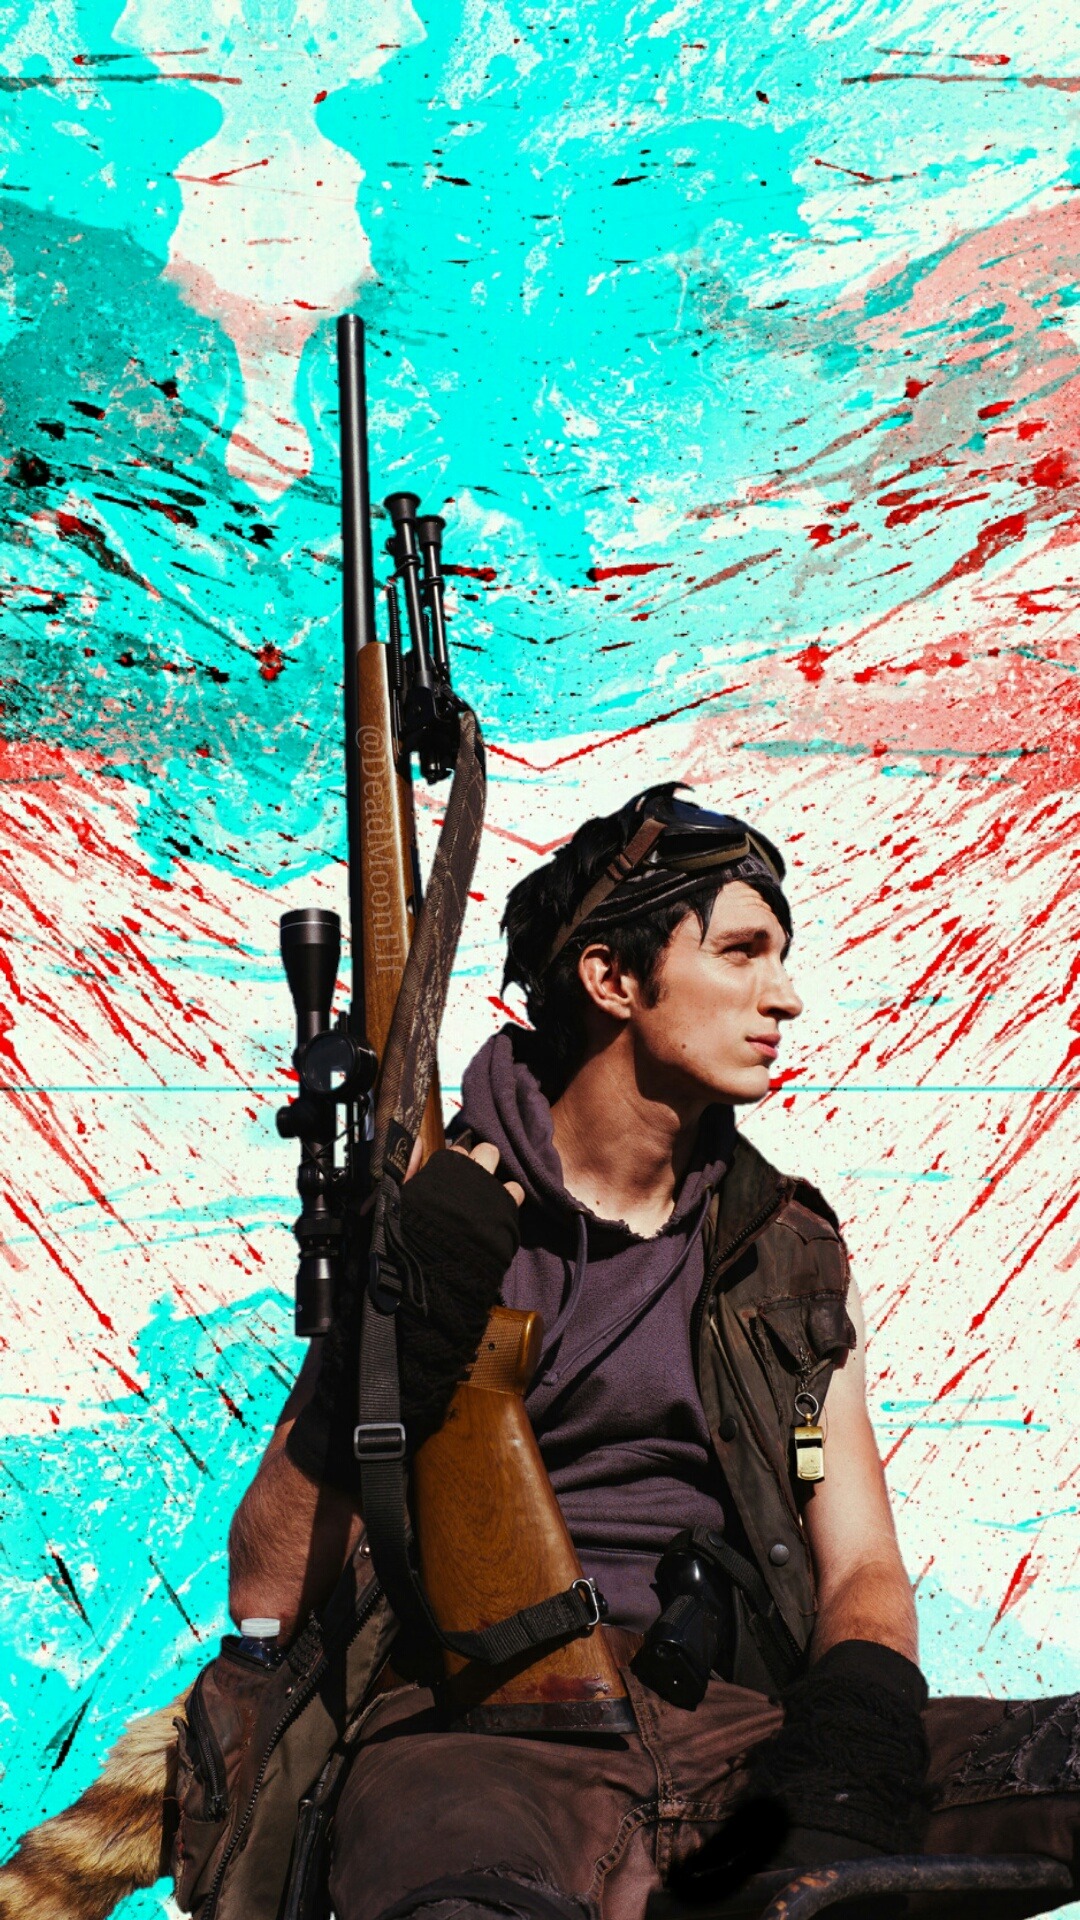 Z Nation Wallpapers